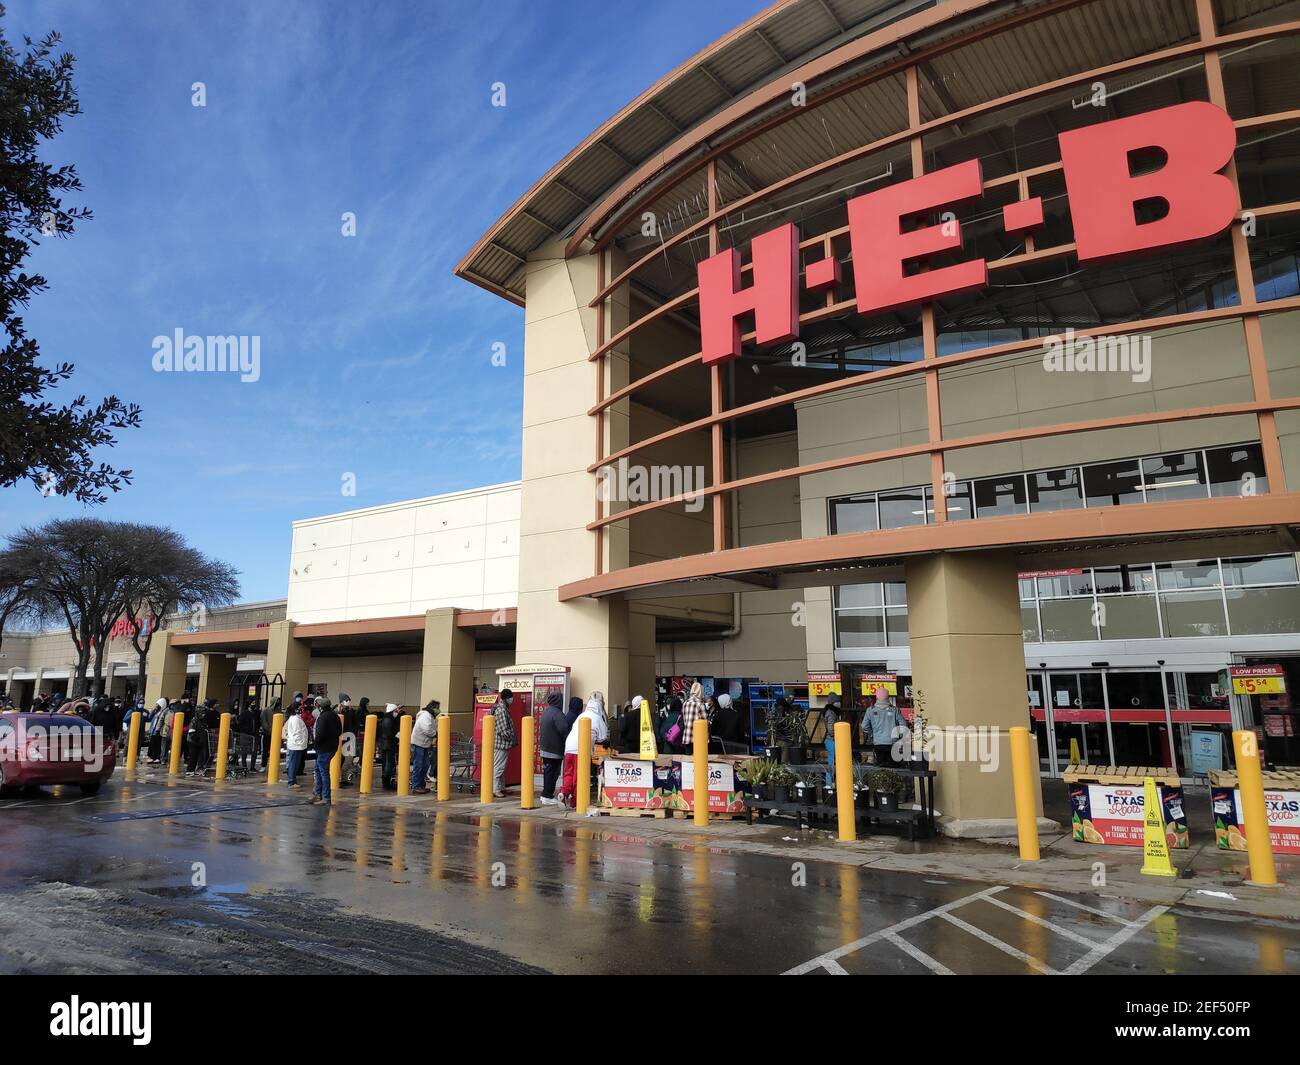 Austin, Texas - February 15, 2021: a long line wraps around an HEB grocery store with snow outside Stock Photo